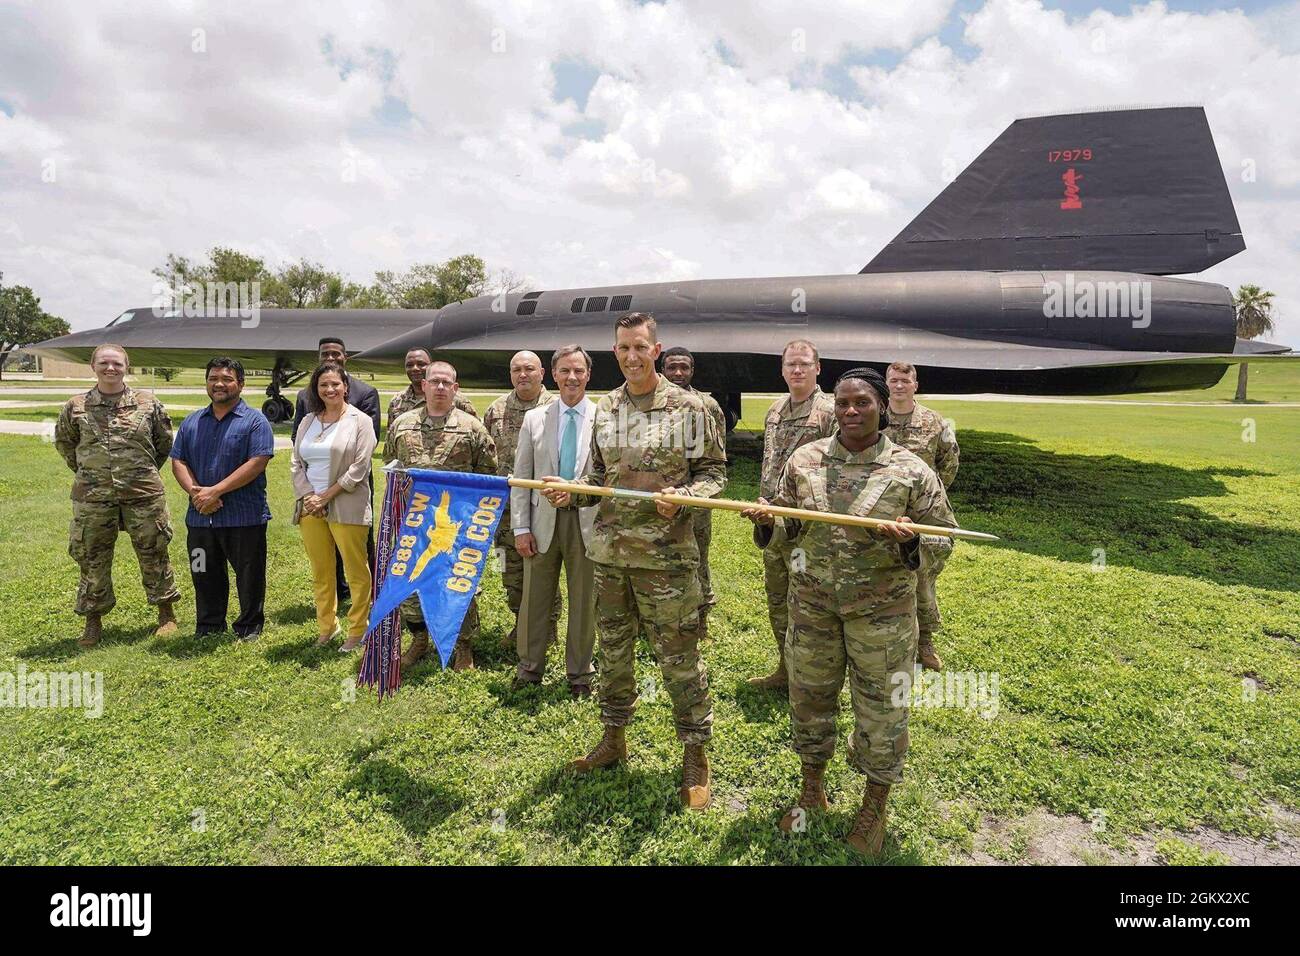 690th Cyberspace Operations Group Staff Takes Photo In Front Of A Lockheed Sr 71 Blackbird 